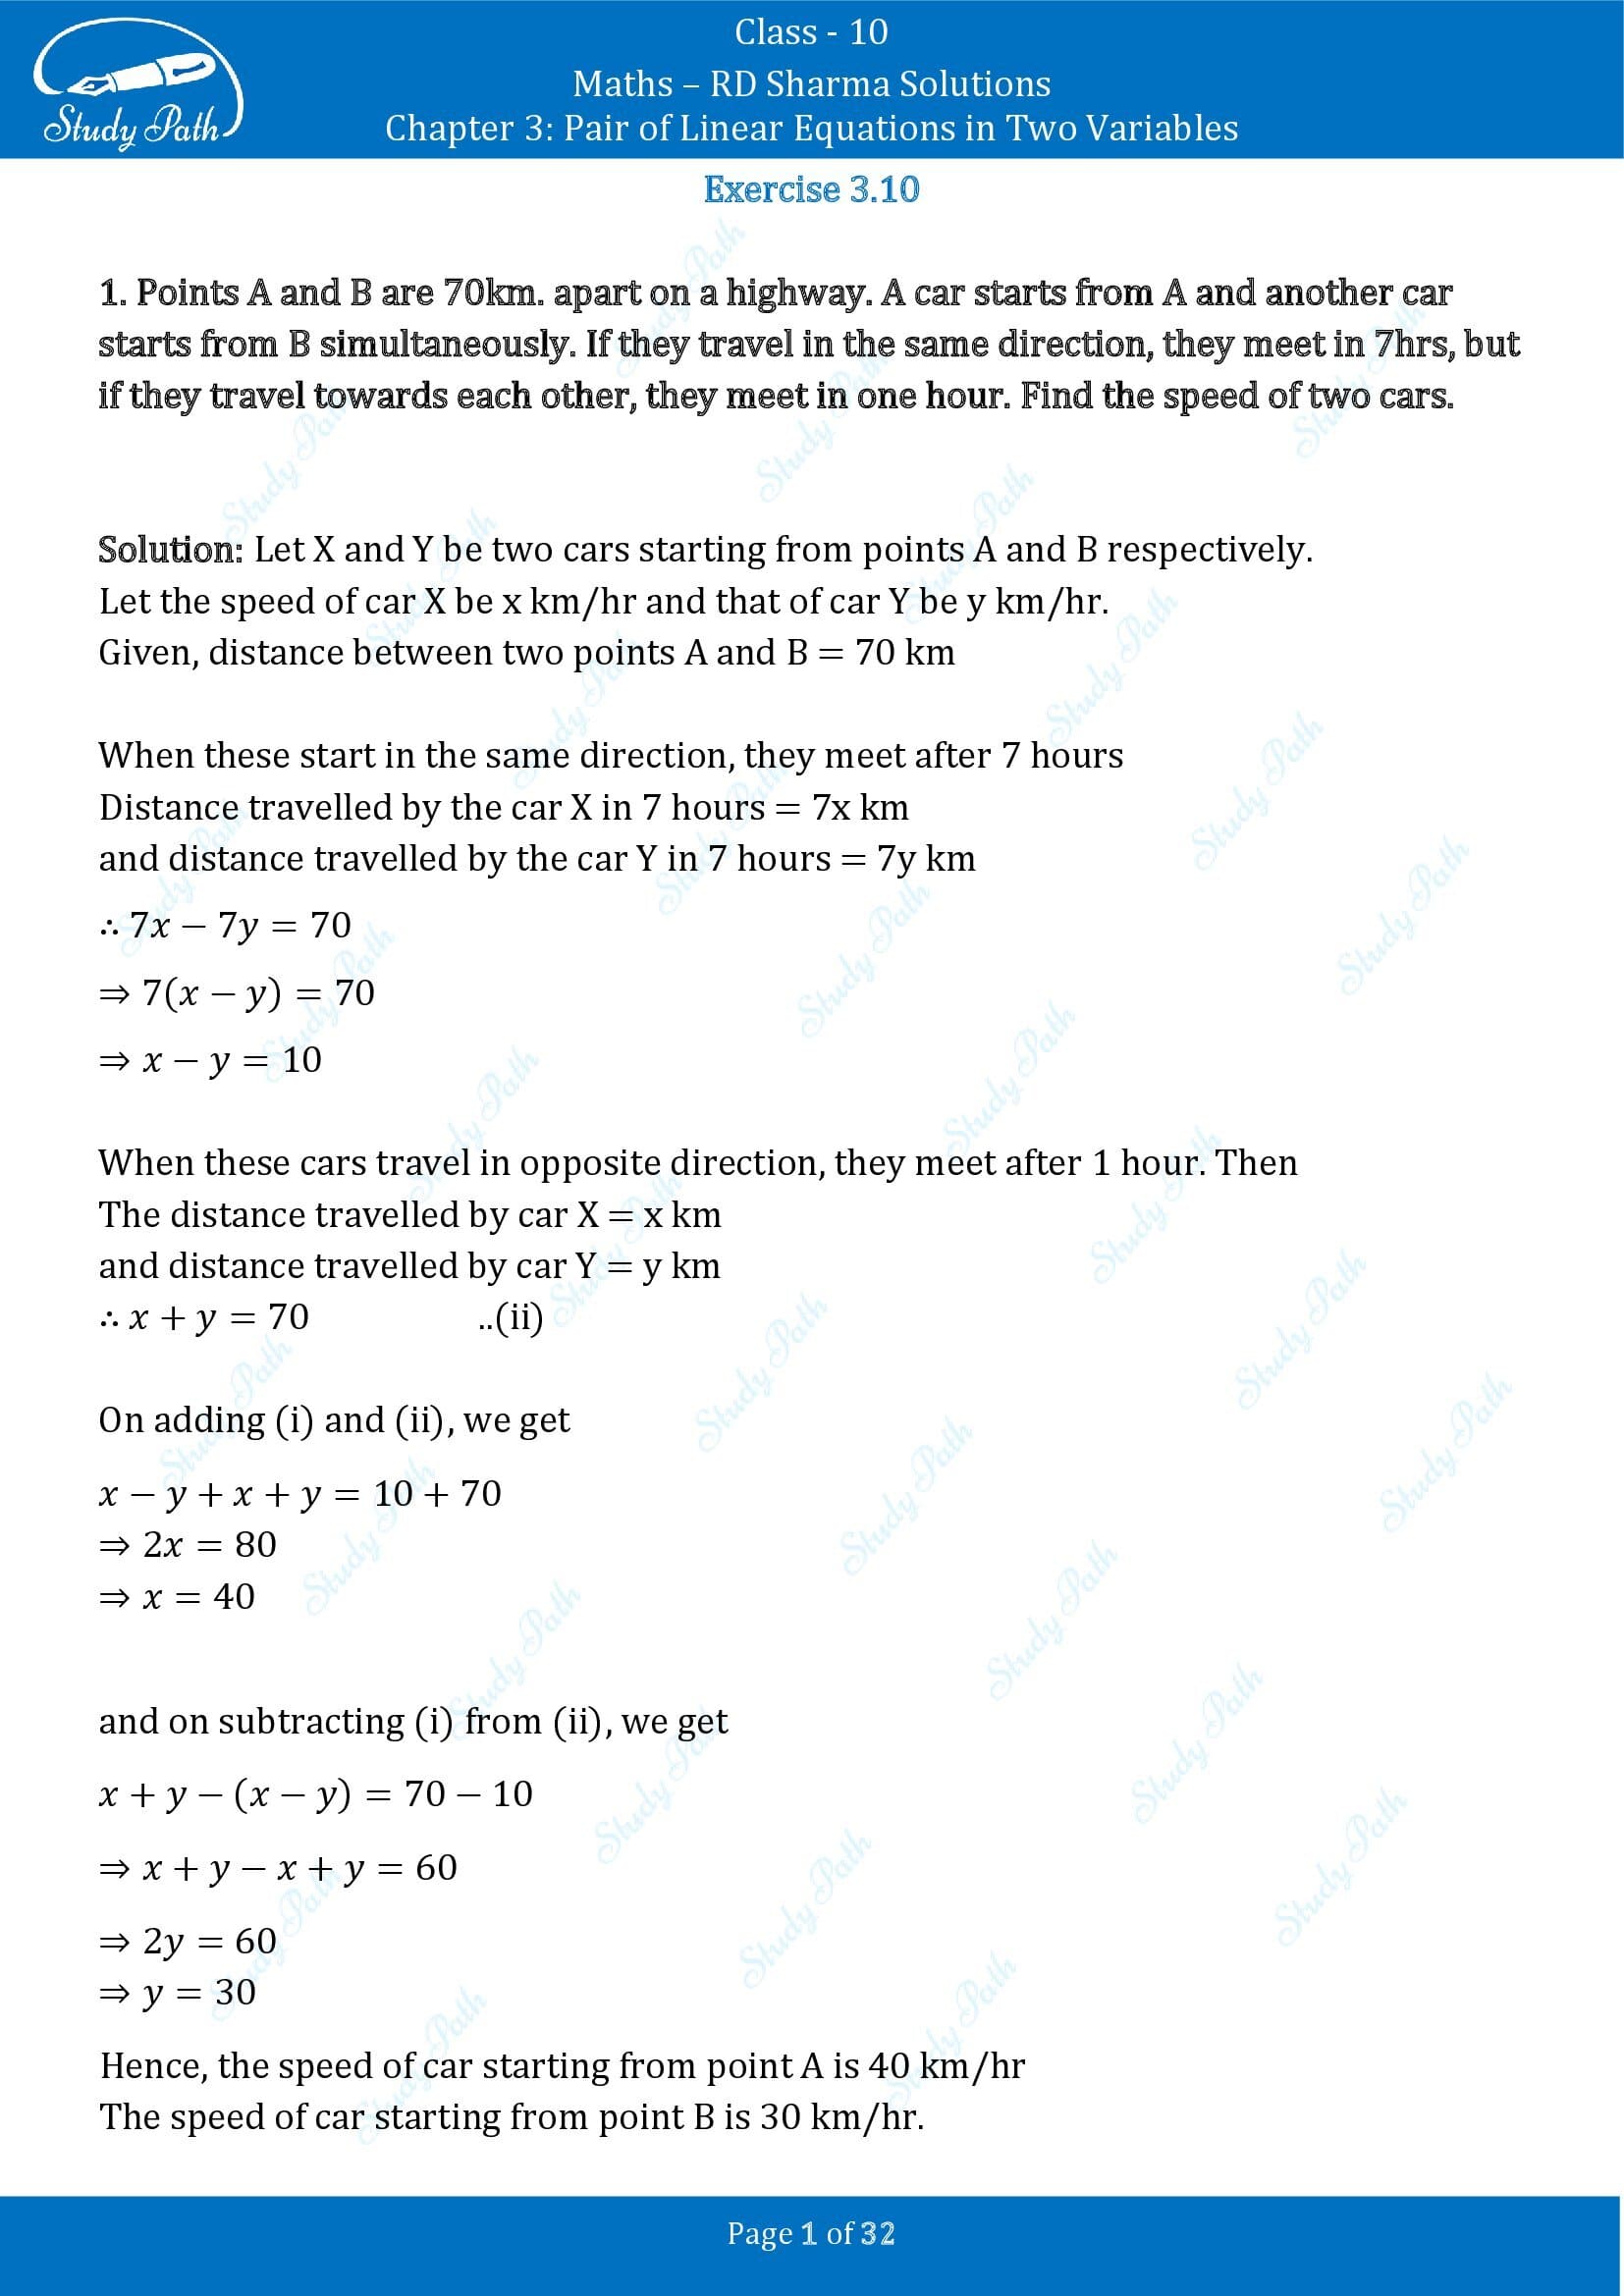 RD Sharma Solutions Class 10 Chapter 3 Pair of Linear Equations in Two Variables Exercise 3.10 00001